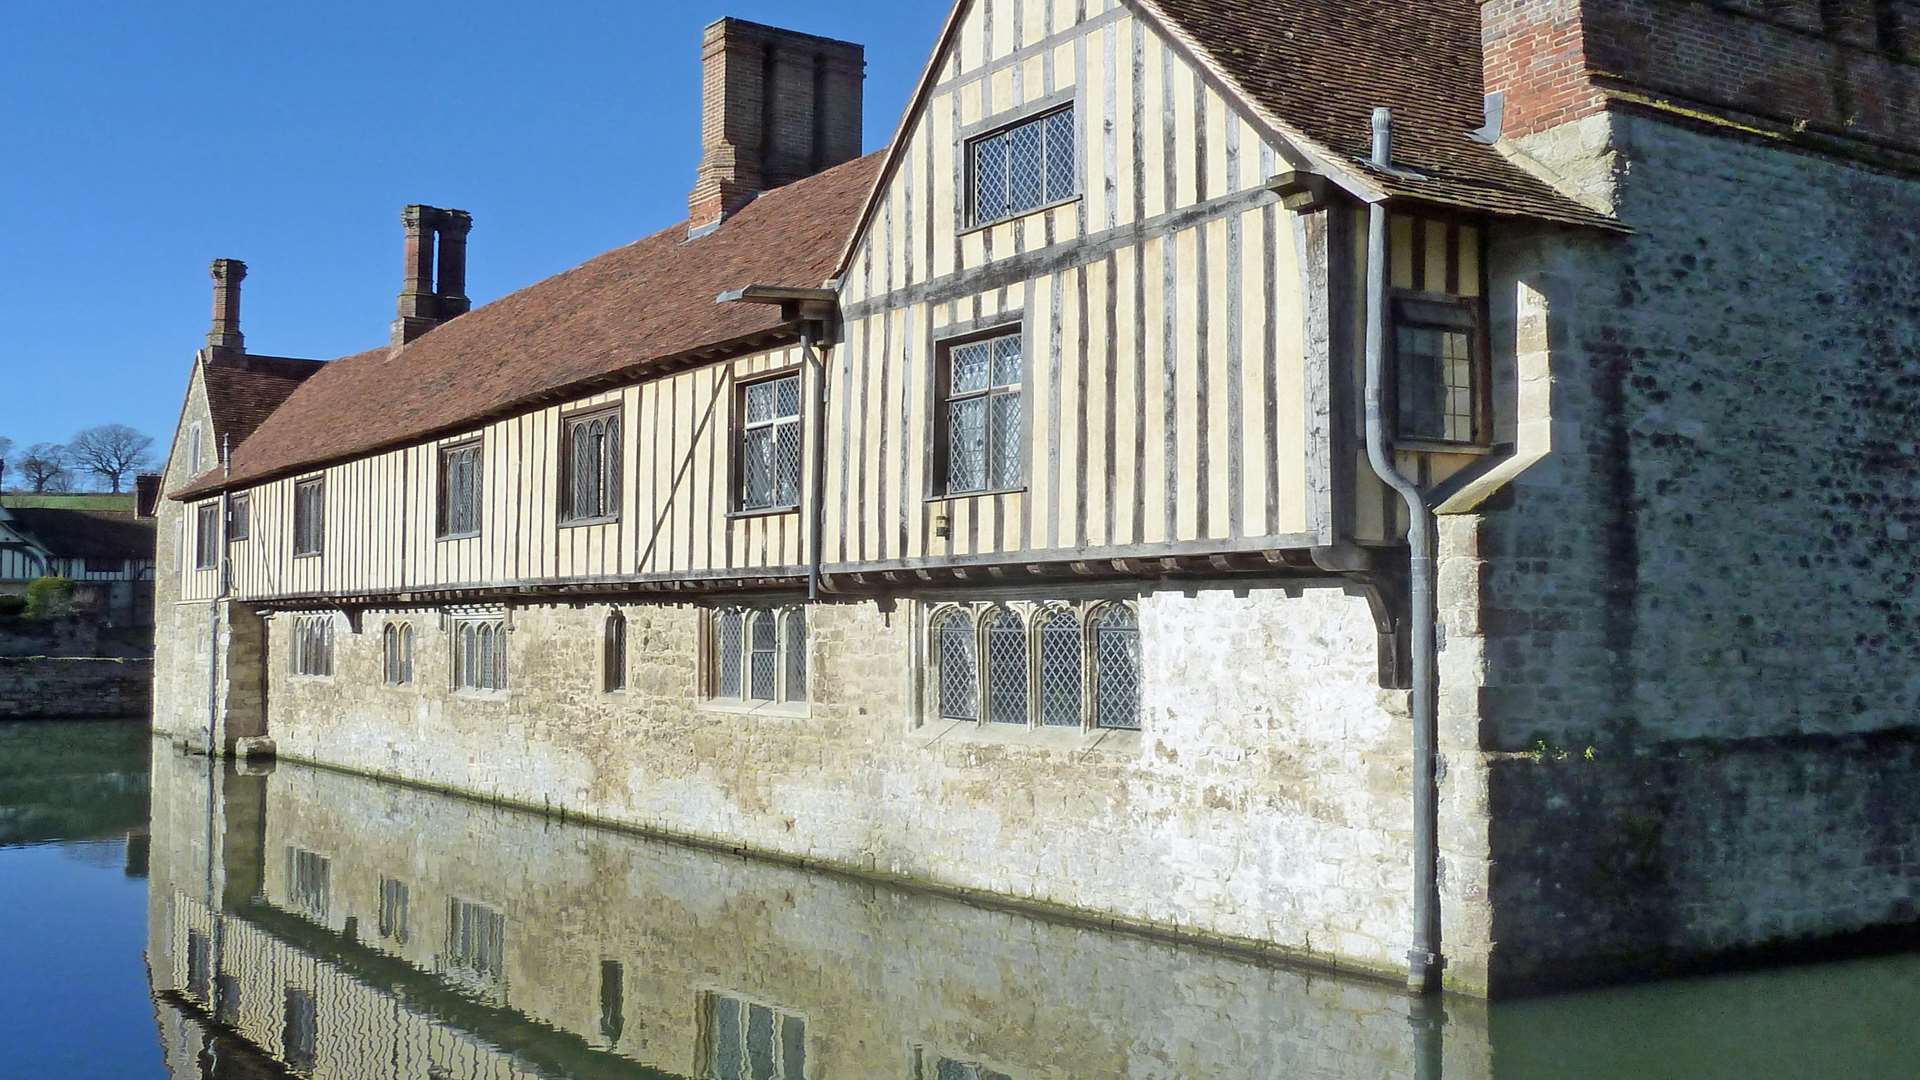 Ightham Mote will be holding a celebratory event